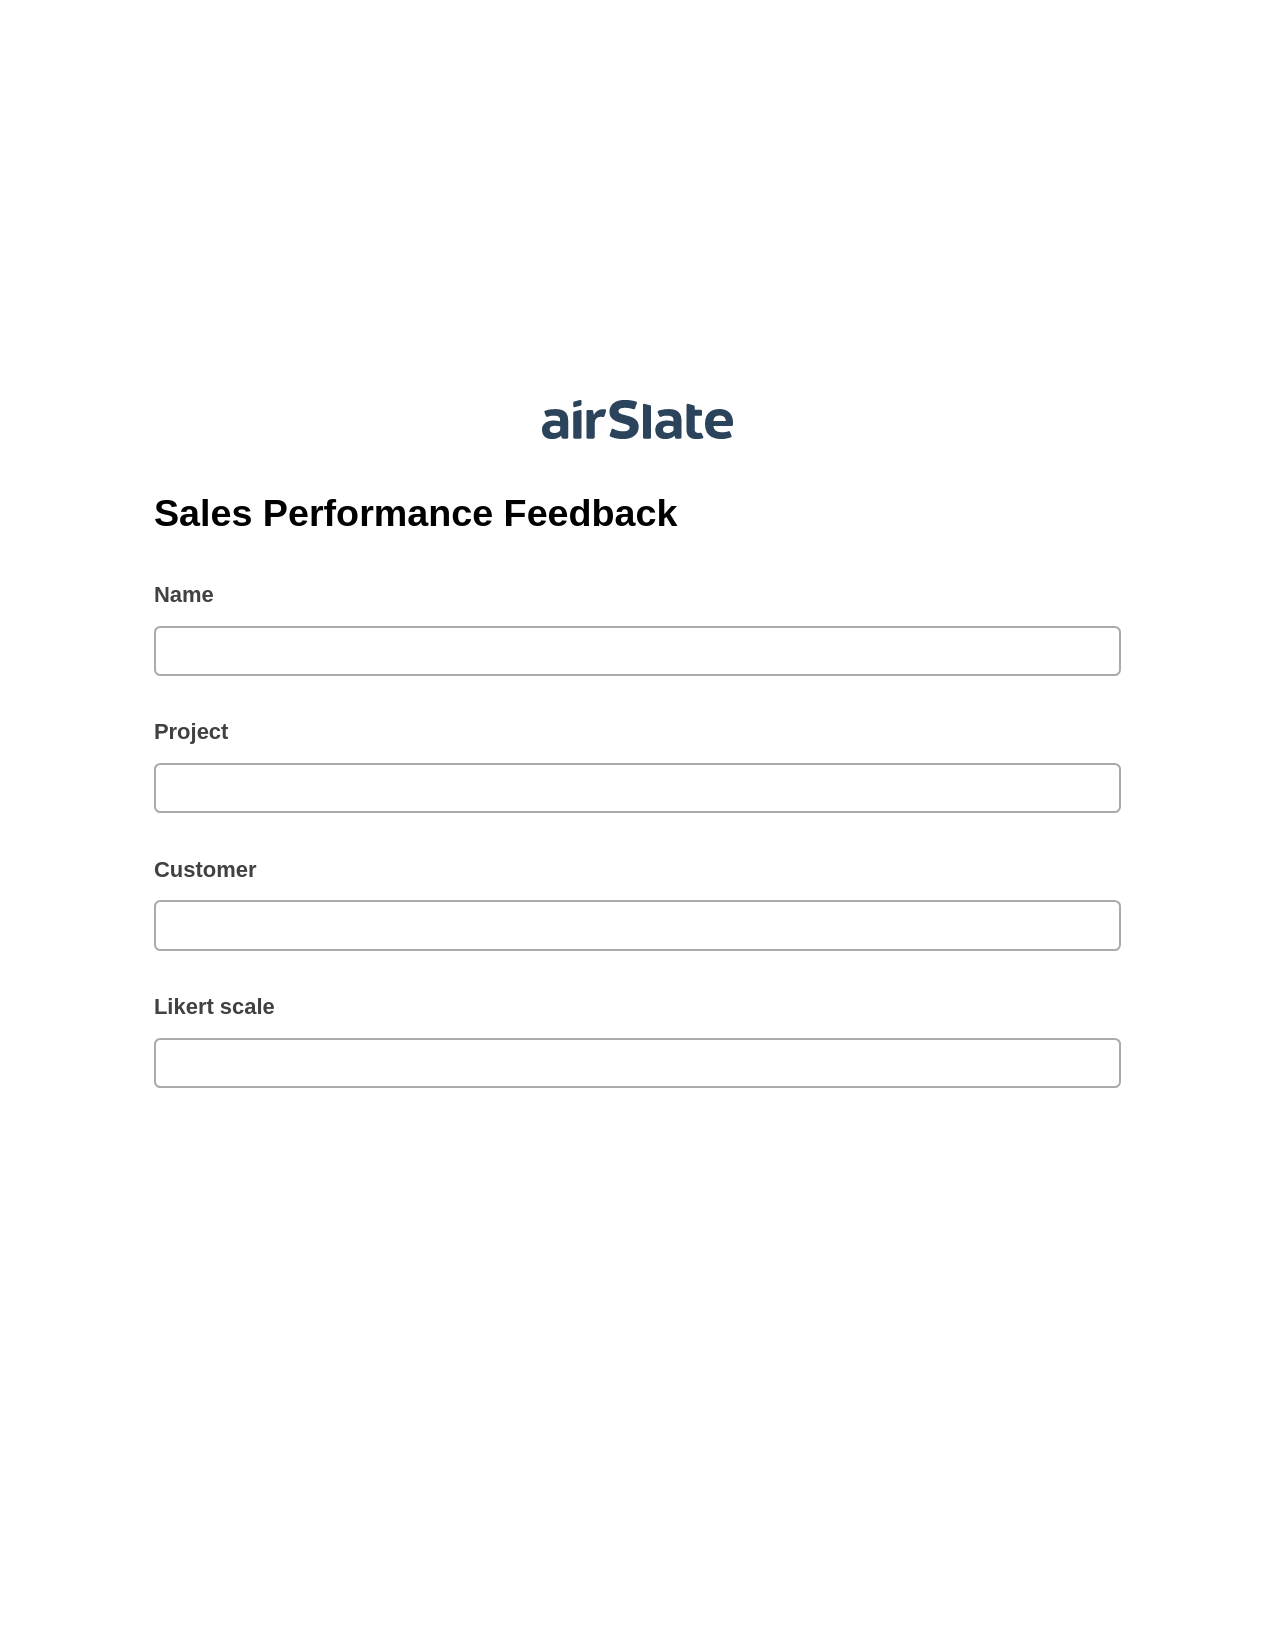 Sales Performance Feedback Pre-fill Slate from MS Dynamics 365 Records Bot, Roles Reminder Bot, Export to NetSuite Record Bot